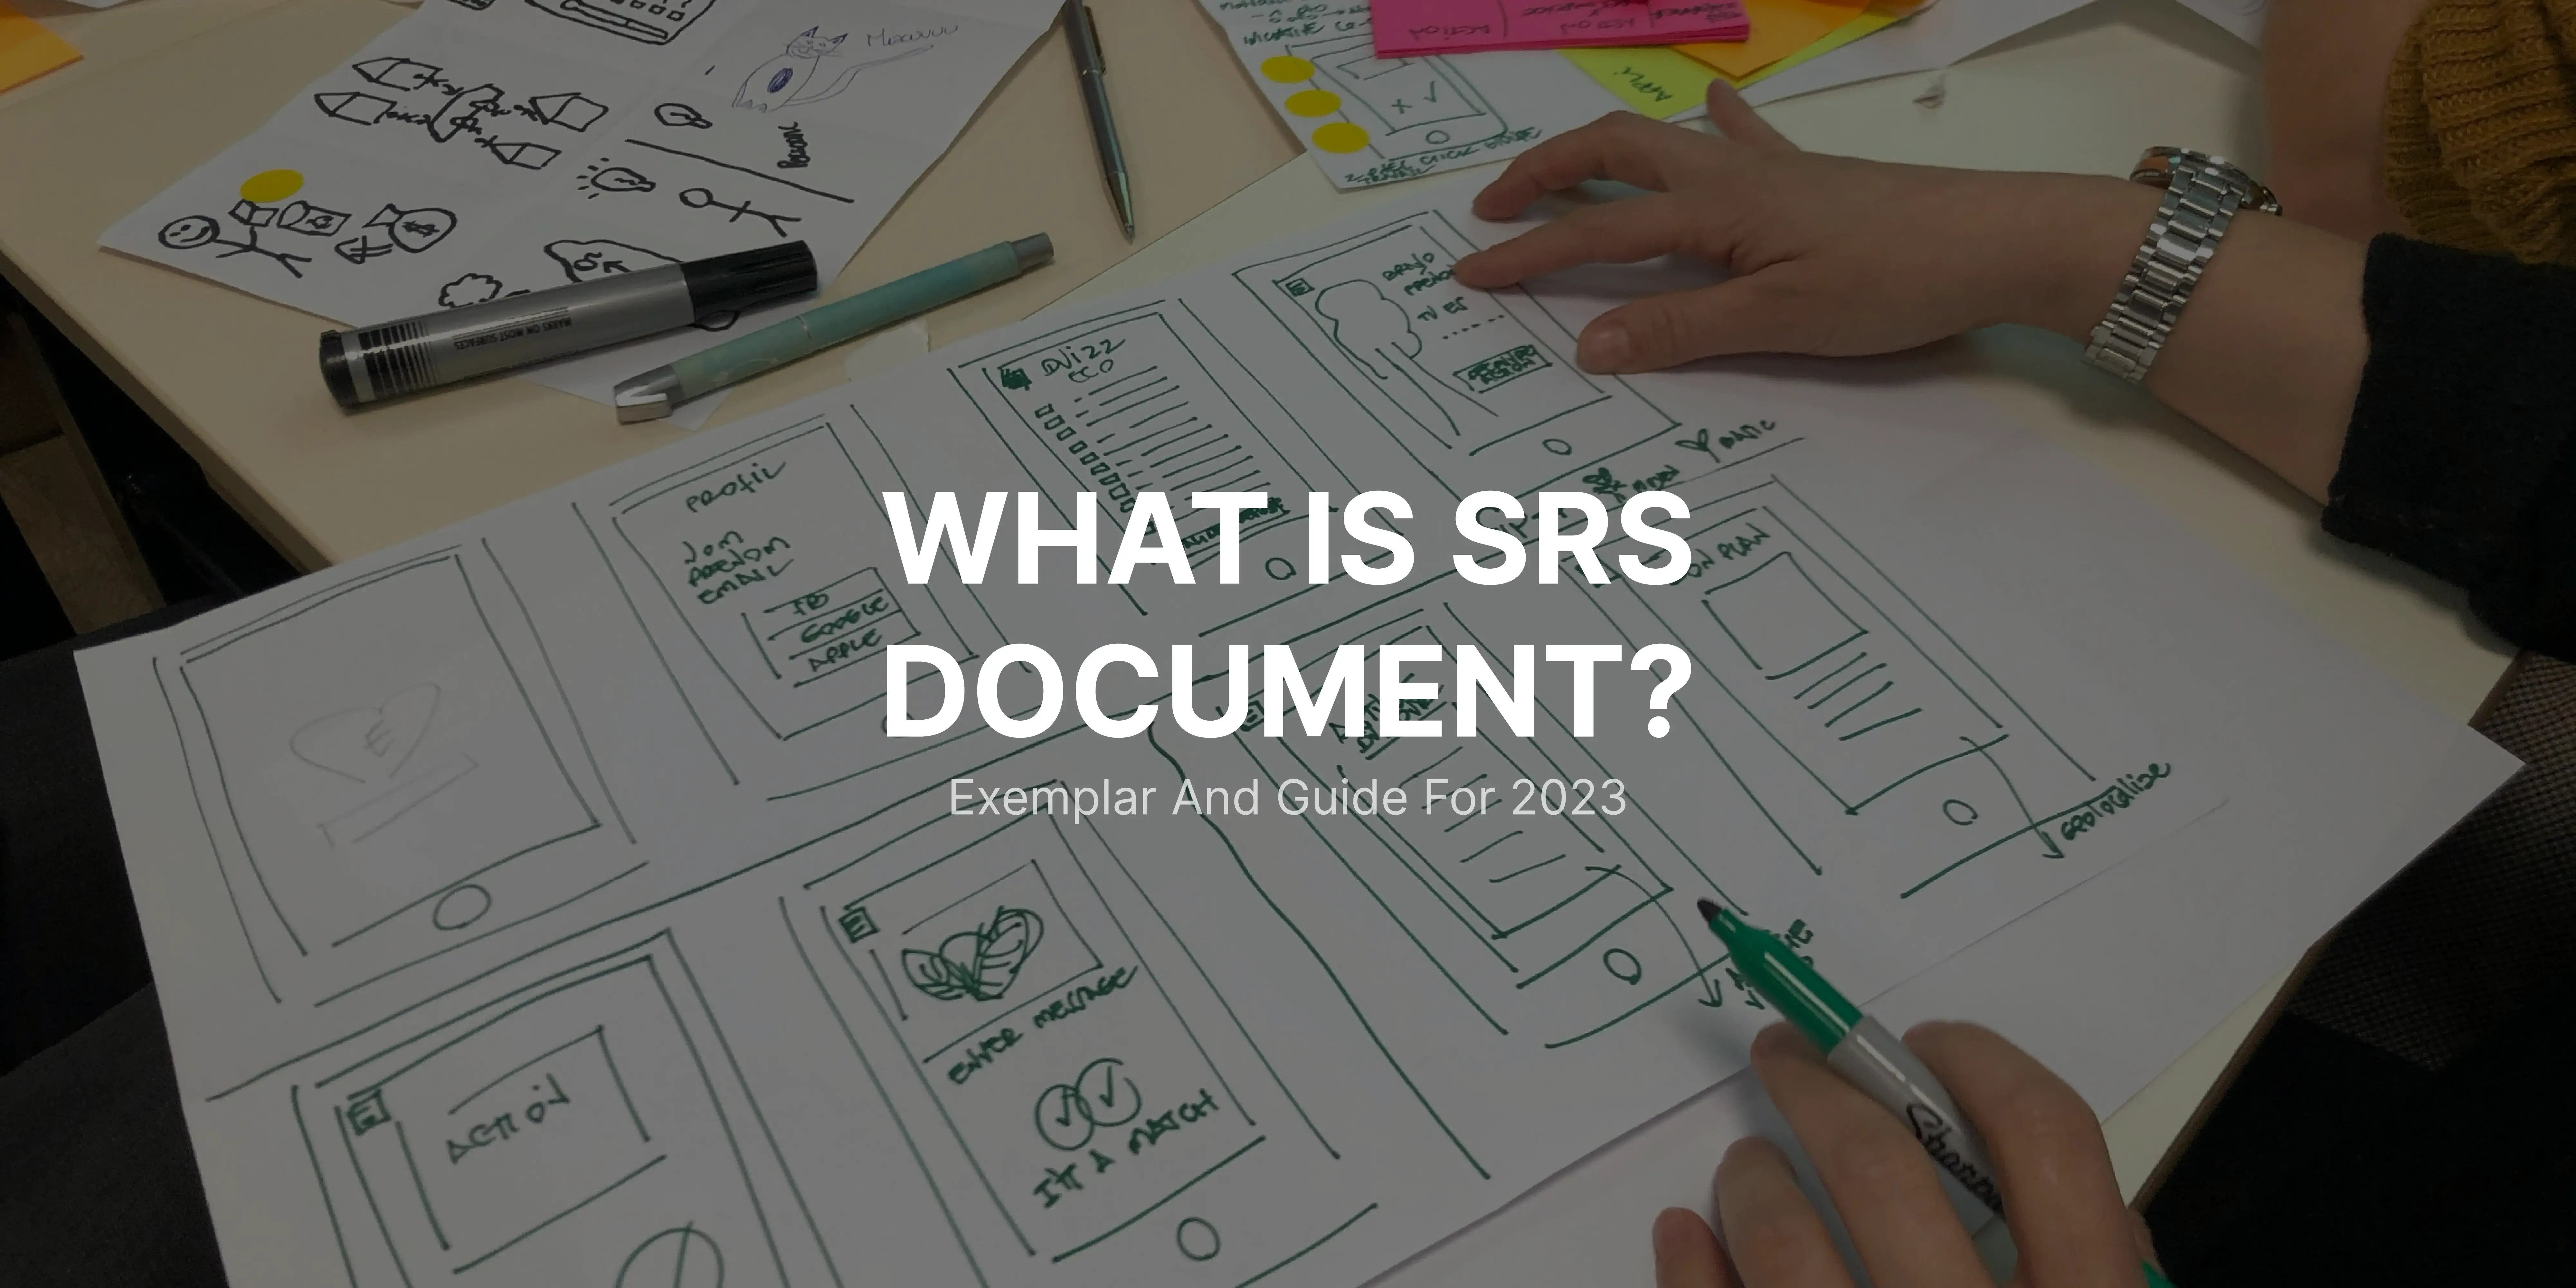 Software Requirements Specification (SRS): Exemplar and Guide for 2023